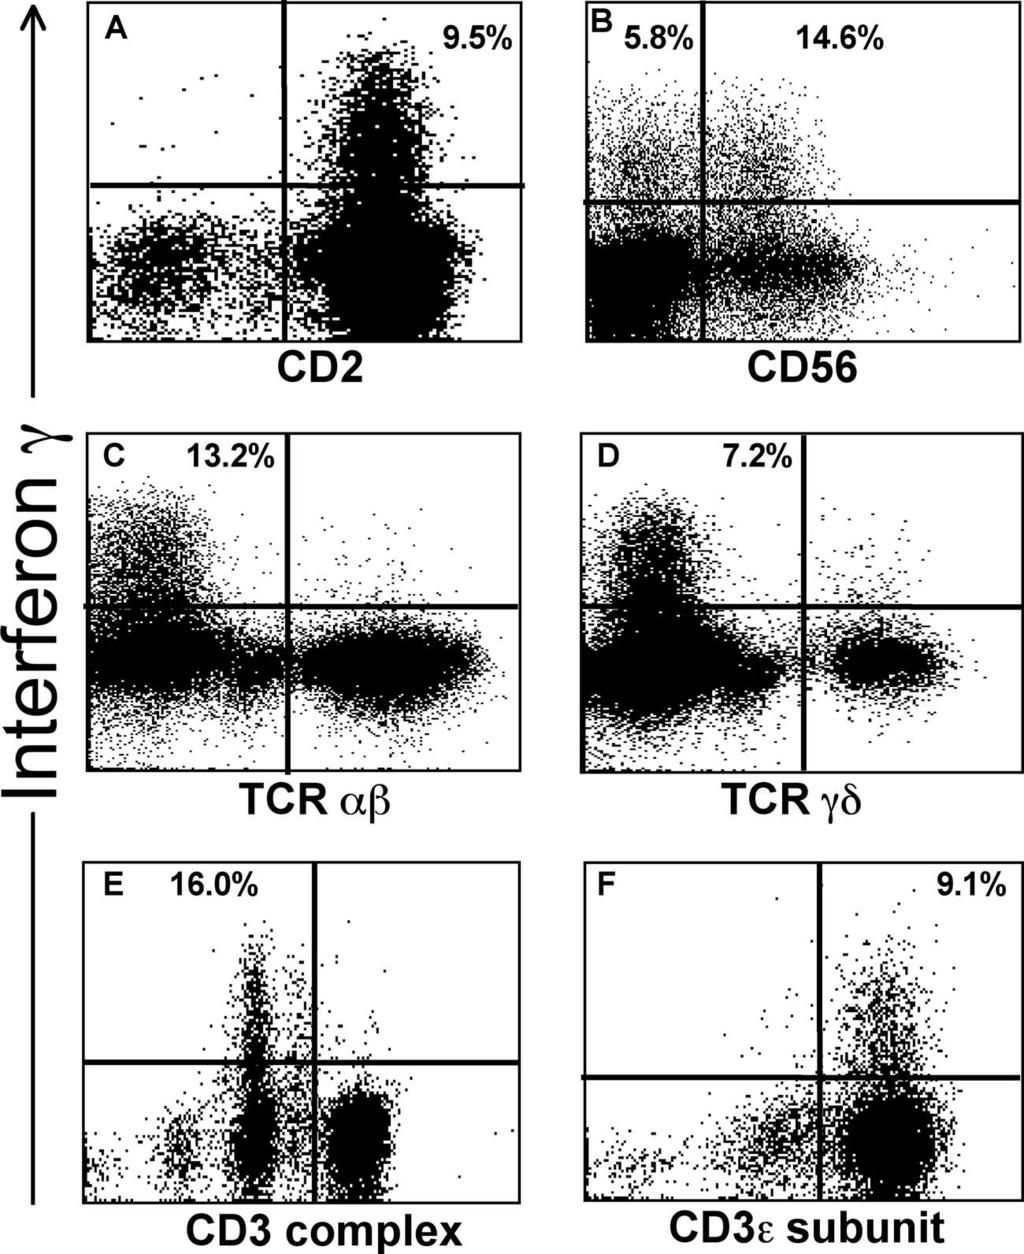 VOL. 82, 2008 NK-MEDIATED ADCC IN HIV 5455 Downloaded from http://jvi.asm.org/ FIG. 3. Cell markers on Vpu-specific IFN- -expressing lymphocytes.